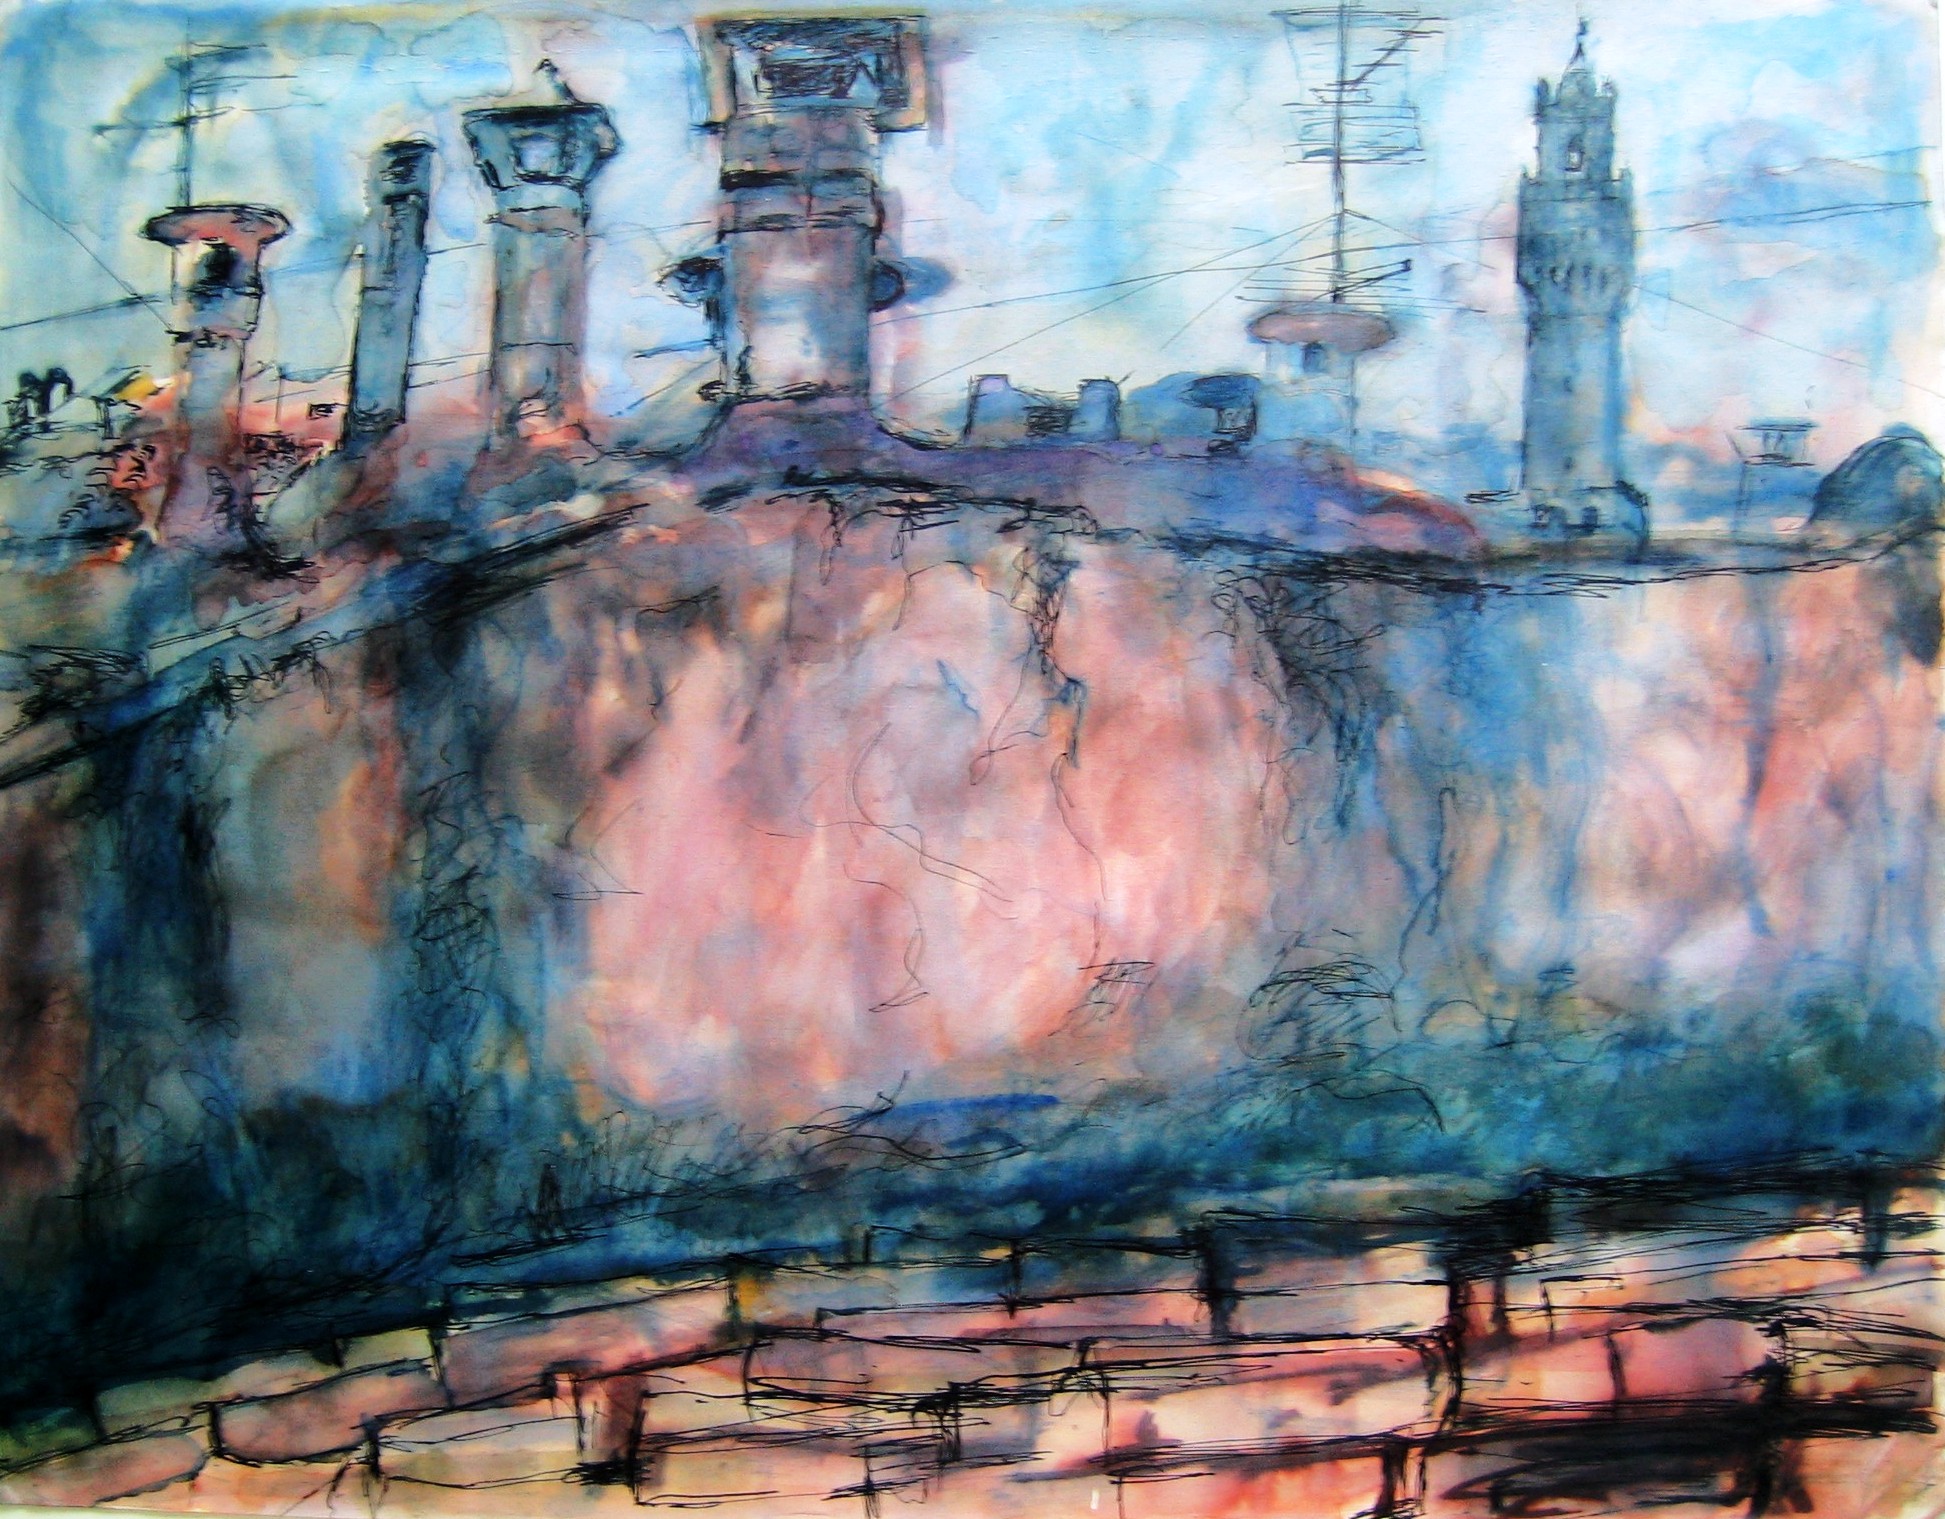 Palazzo Vecchio From My Terrace-2005-Watercolor on paper-20h x 26 w in